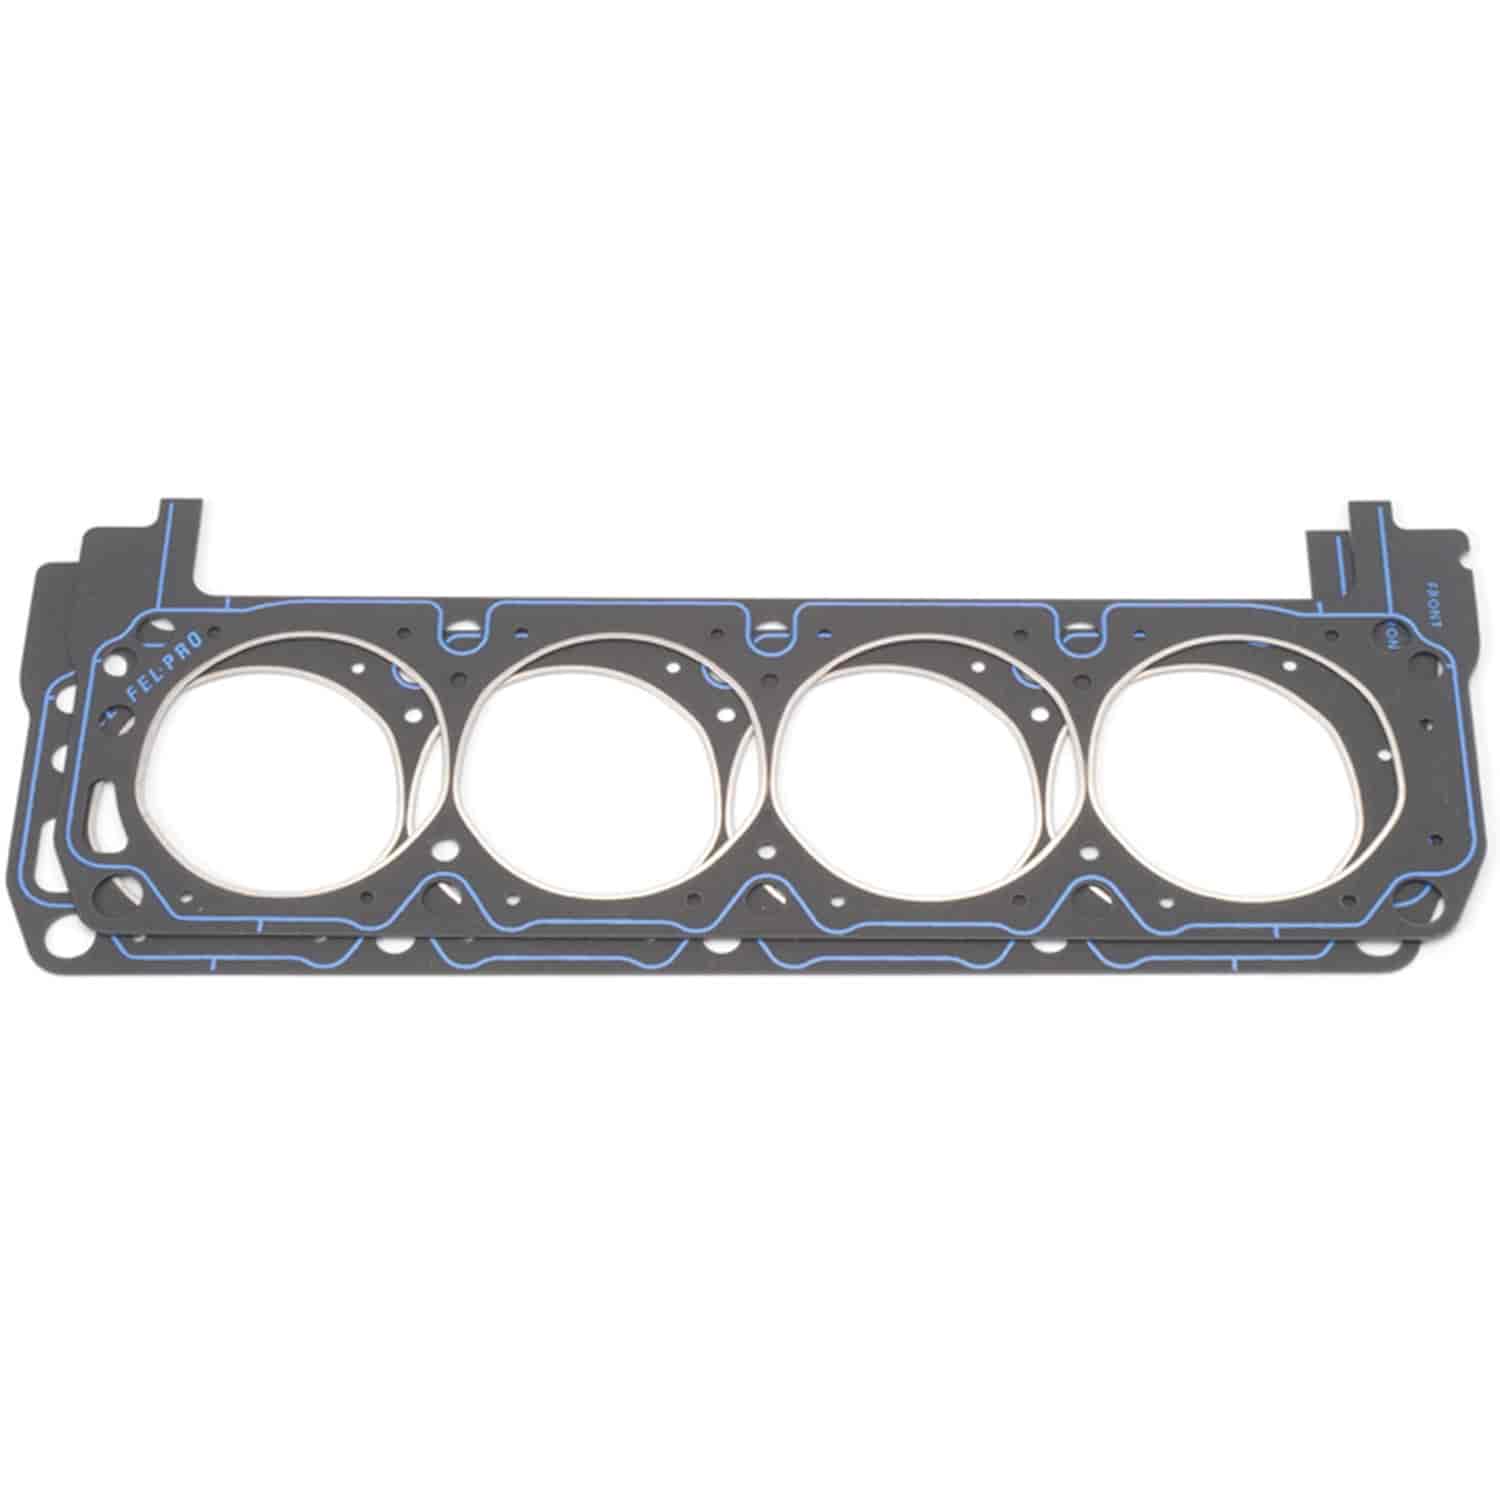 Head Gaskets for Small Block Ford 302/351w E-Boss and Clevor Conversions